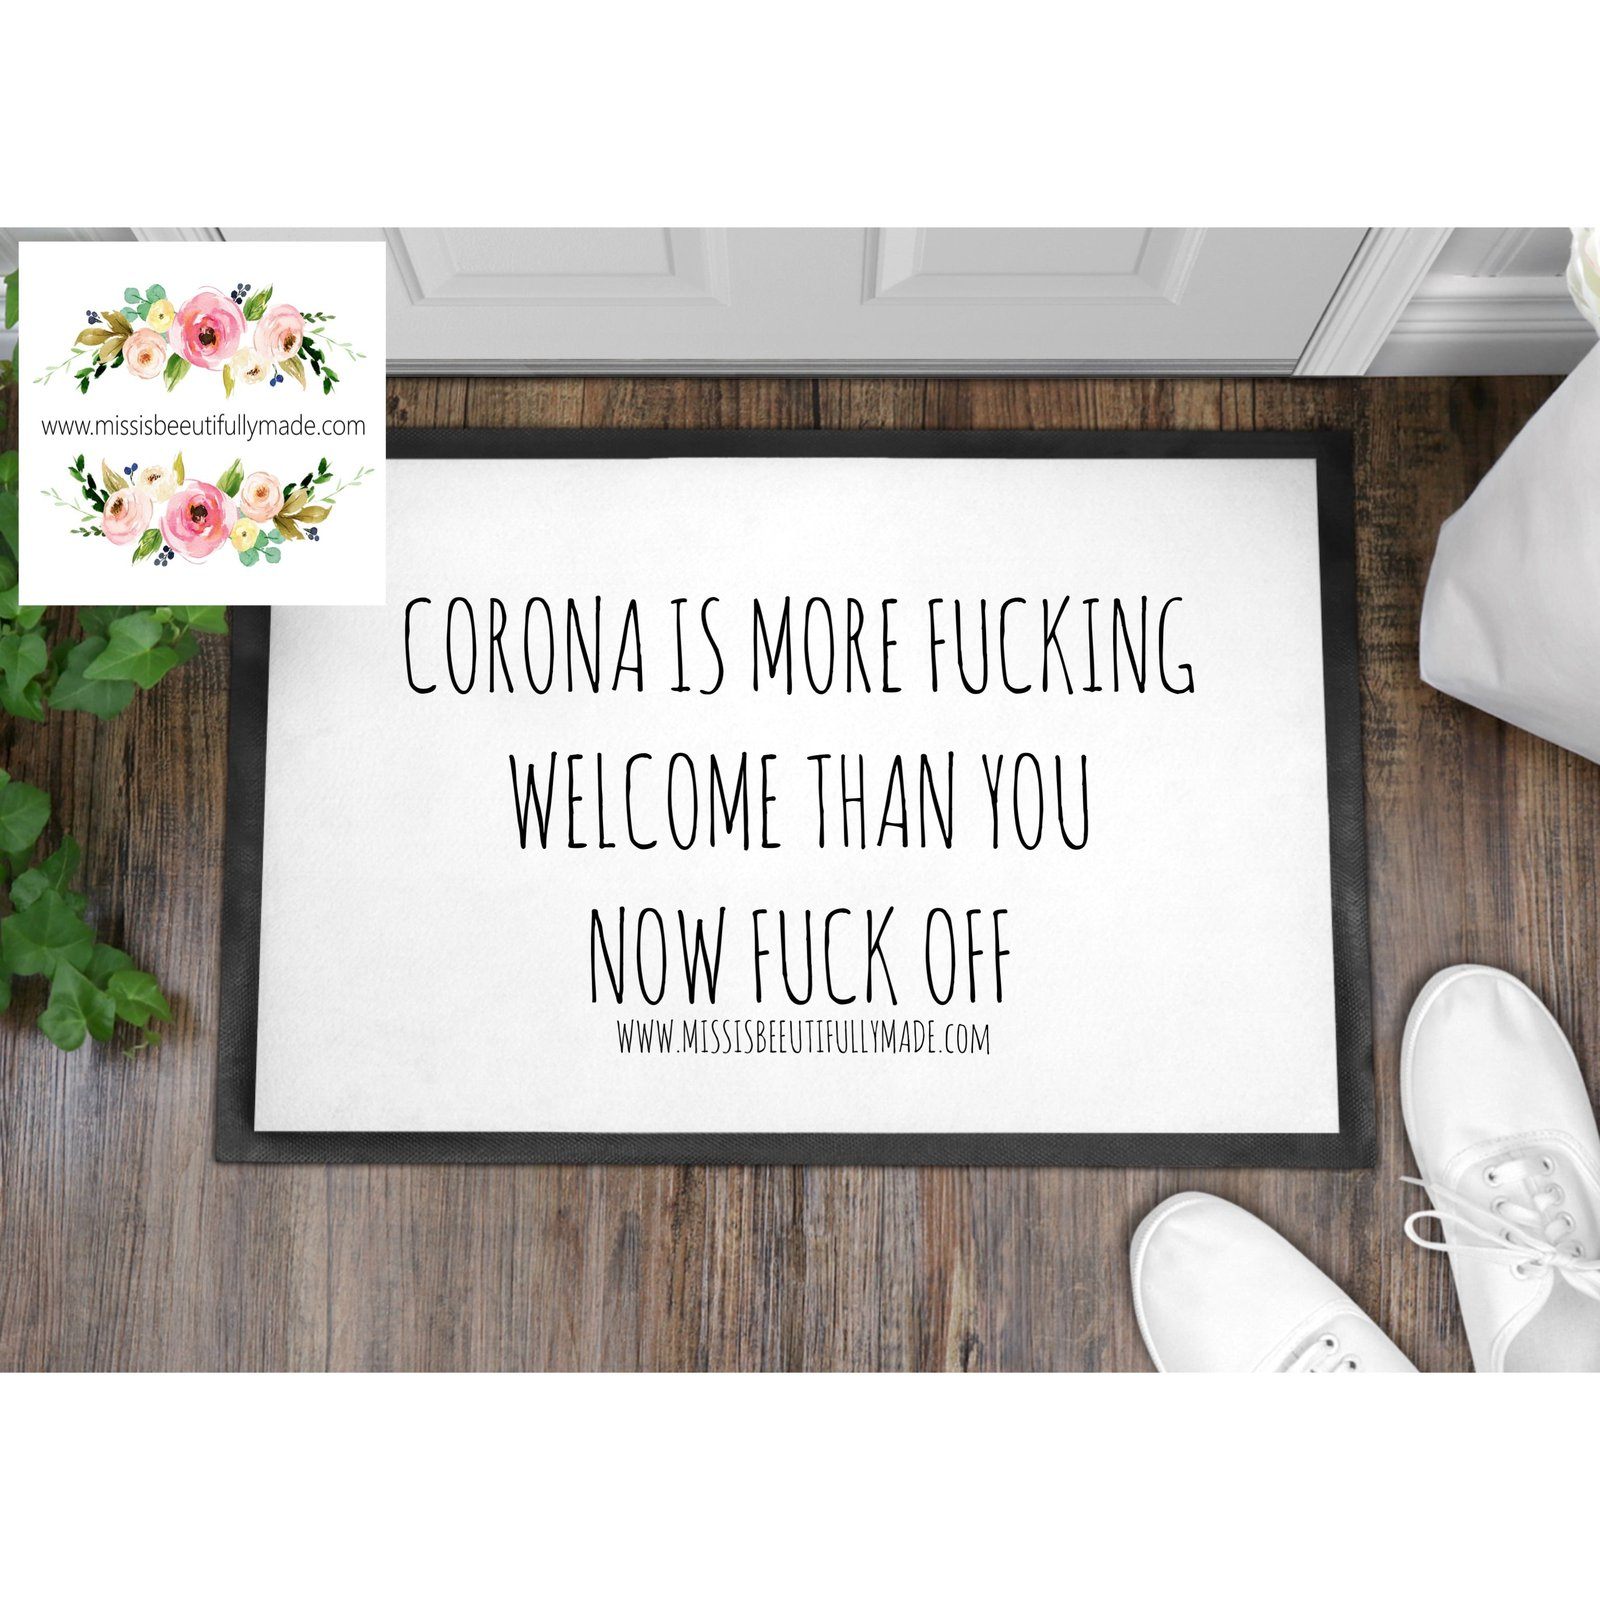 White non slip door mat with a rubber backing. The front is white with a black printed design saying corona is more fucking welcome than you now fuck off. measure 40x60cm.